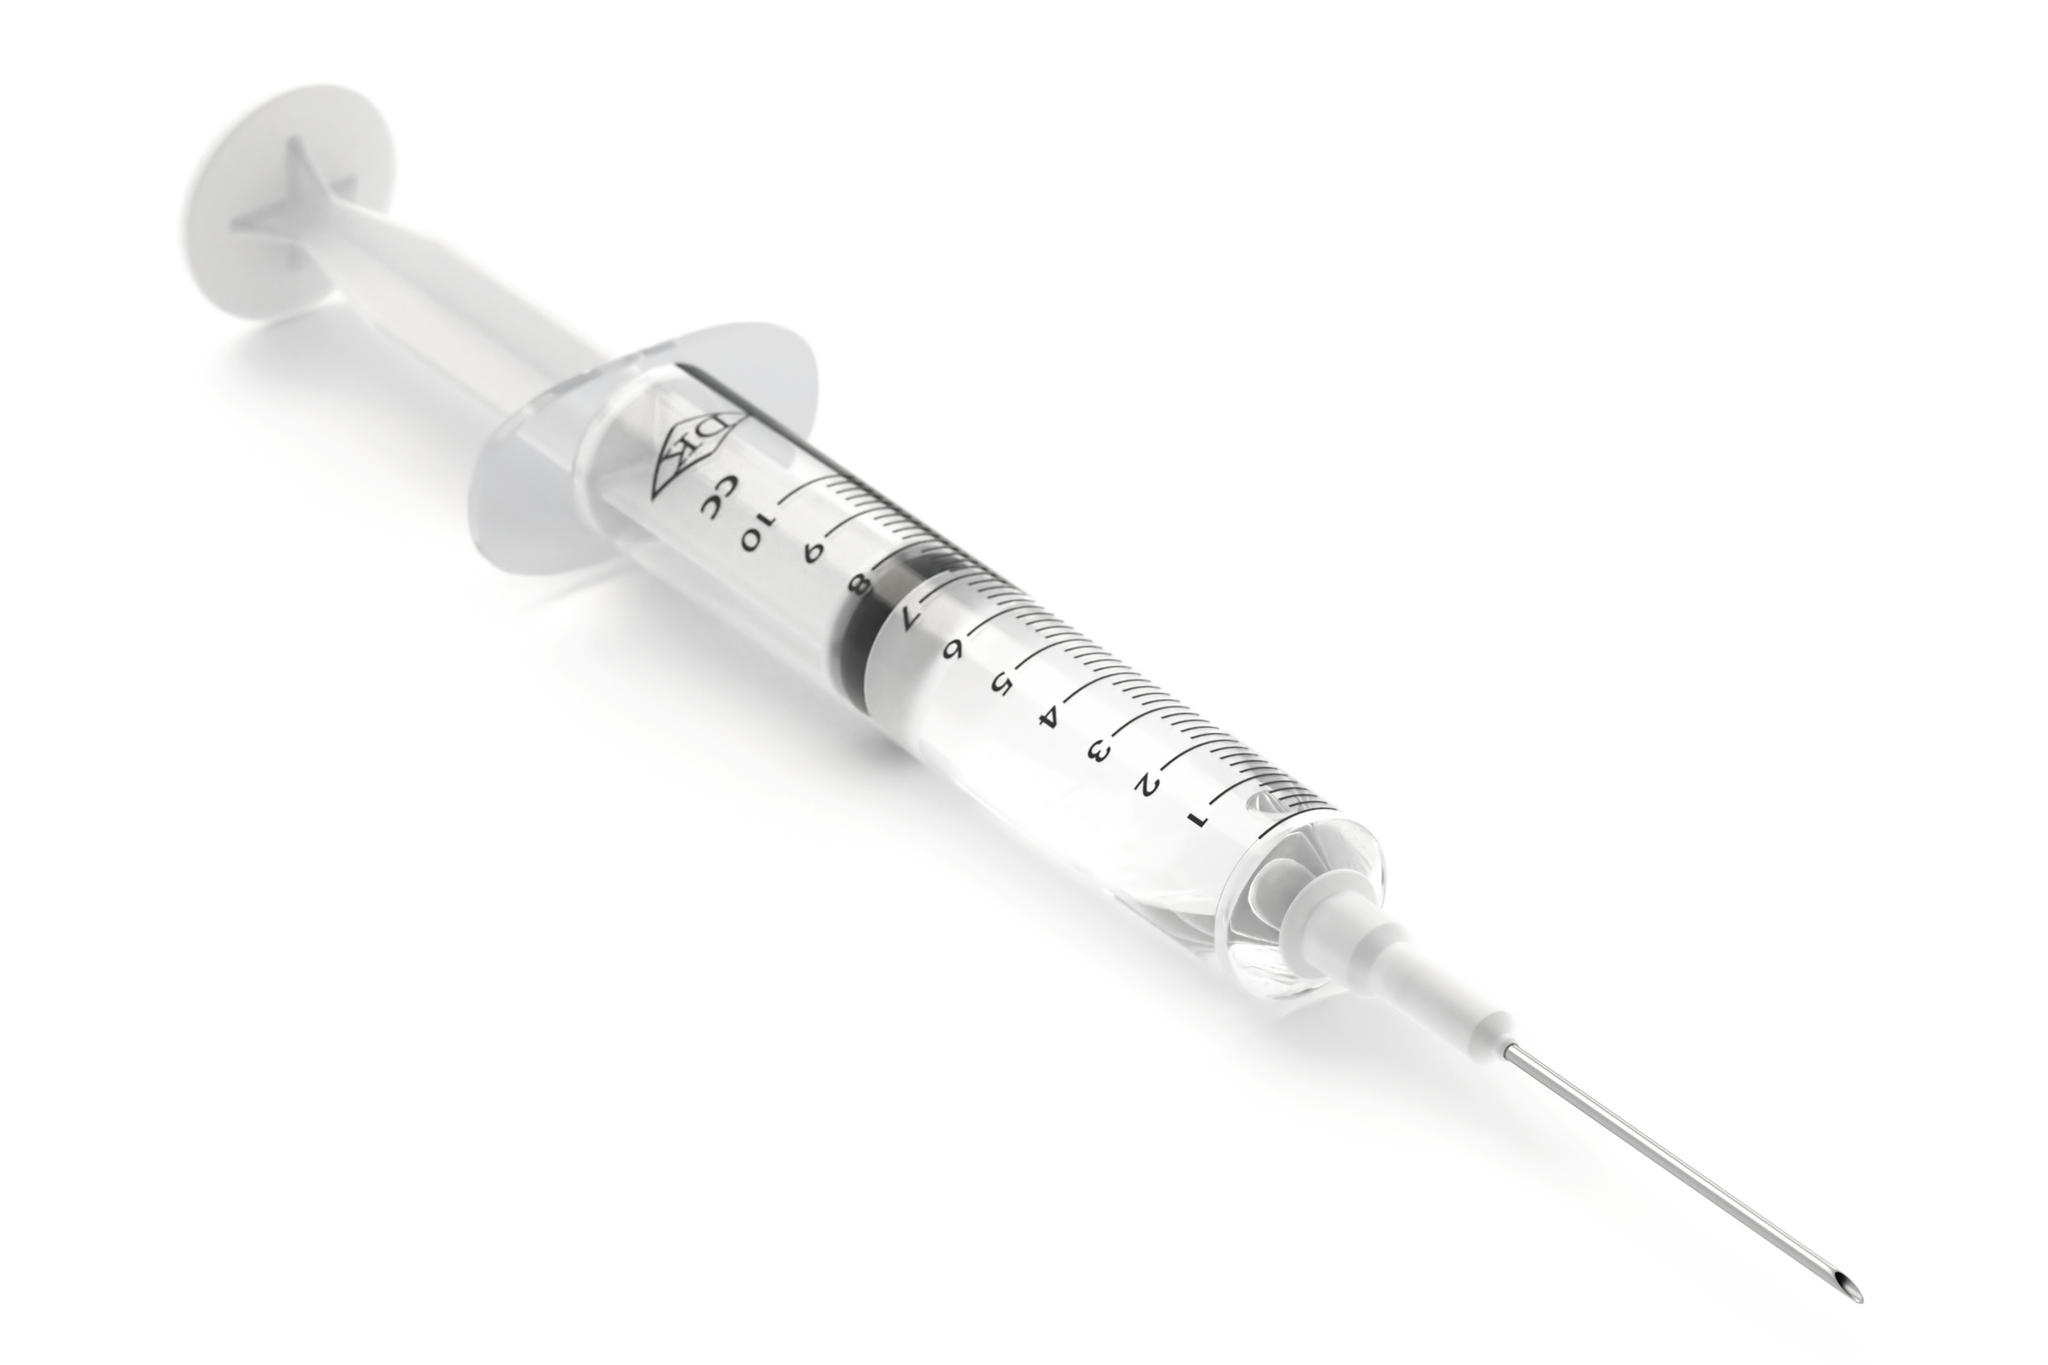 Medical Syringe Isolated Over A White Background    The Observation    